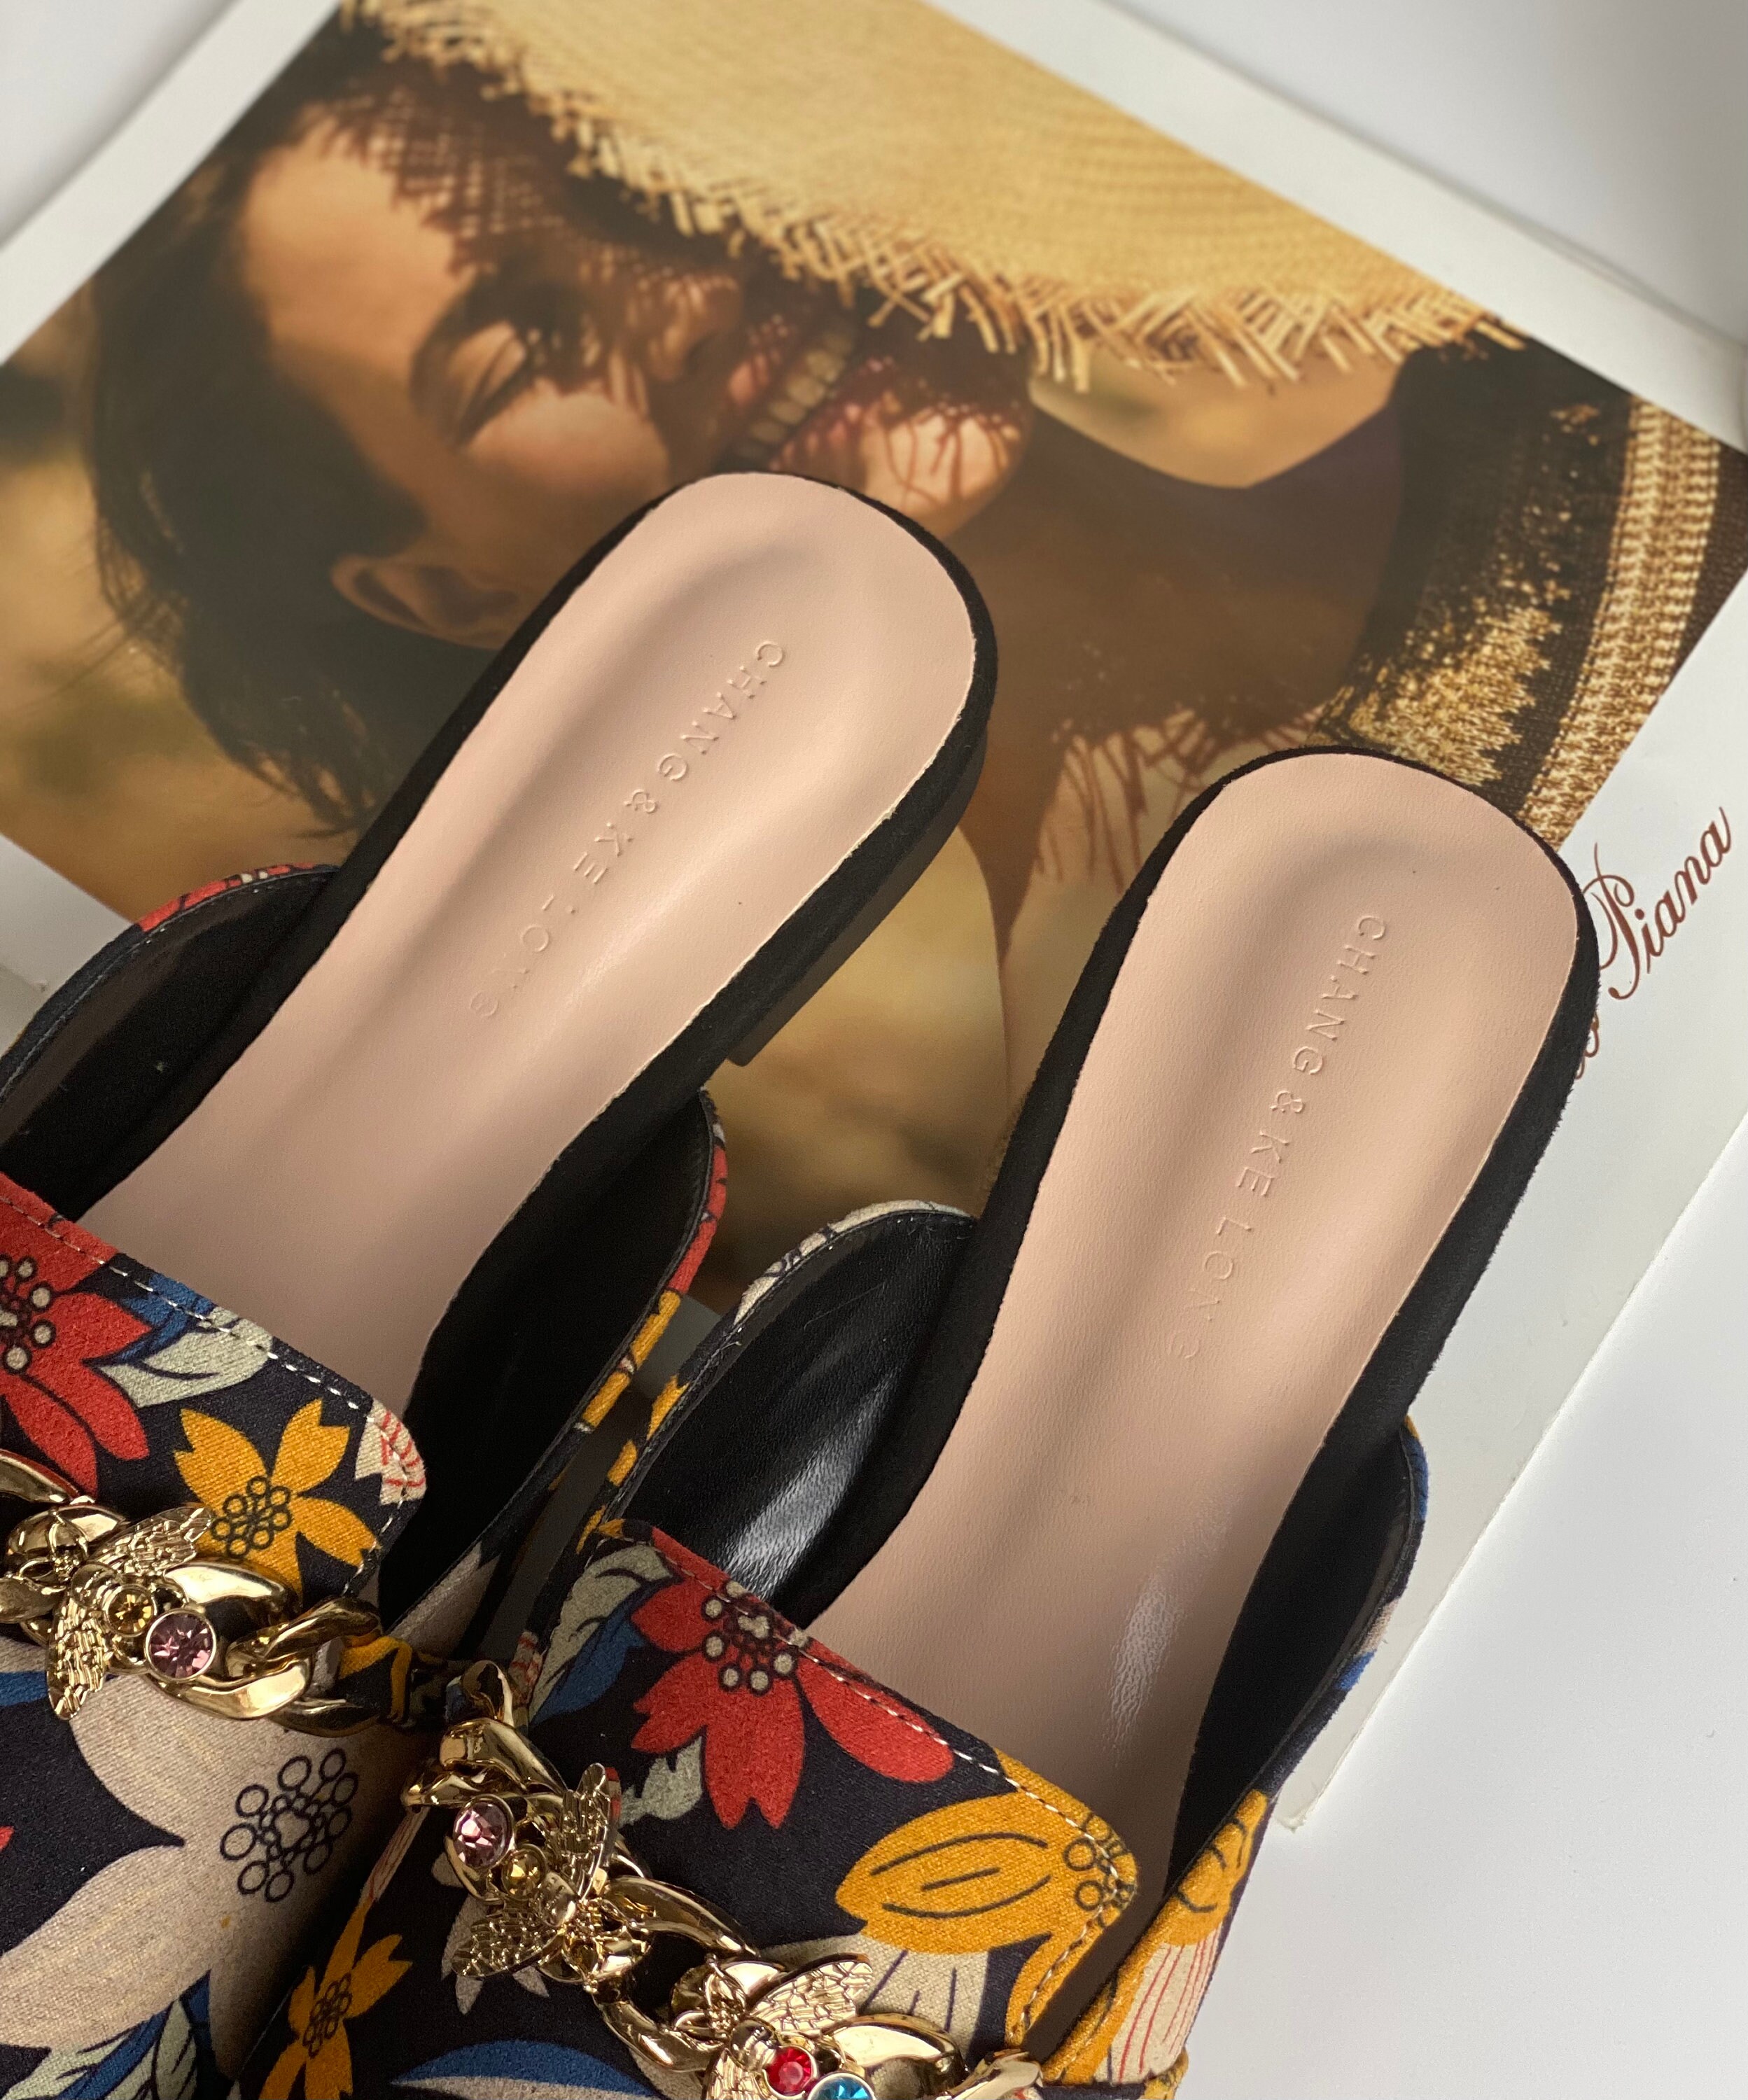 Buy Floral Mule Shoes Woman Pointed Toe Flats Vintage Bee Mules